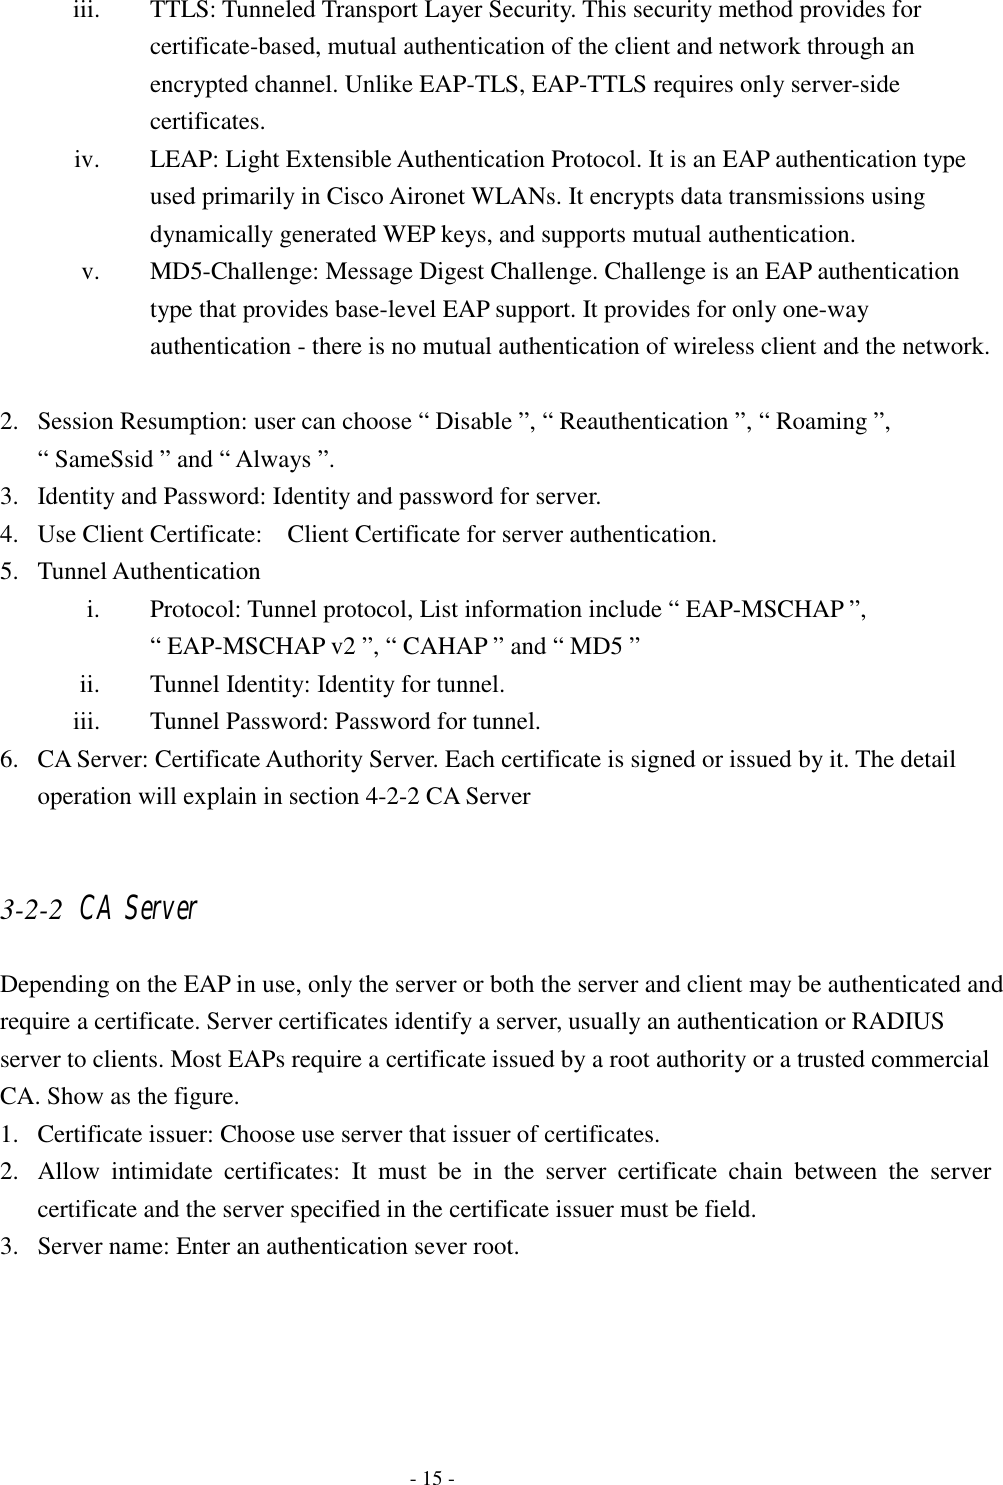    - 15 - iii. TTLS: Tunneled Transport Layer Security. This security method provides for certificate-based, mutual authentication of the client and network through an encrypted channel. Unlike EAP-TLS, EAP-TTLS requires only server-side certificates. iv. LEAP: Light Extensible Authentication Protocol. It is an EAP authentication type used primarily in Cisco Aironet WLANs. It encrypts data transmissions using dynamically generated WEP keys, and supports mutual authentication. v. MD5-Challenge: Message Digest Challenge. Challenge is an EAP authentication type that provides base-level EAP support. It provides for only one-way authentication - there is no mutual authentication of wireless client and the network.  2. Session Resumption: user can choose “ Disable ”, “ Reauthentication ”, “ Roaming ”, “ SameSsid ” and “ Always ”. 3. Identity and Password: Identity and password for server. 4. Use Client Certificate:    Client Certificate for server authentication. 5. Tunnel Authentication i. Protocol: Tunnel protocol, List information include “ EAP-MSCHAP ”, “ EAP-MSCHAP v2 ”, “ CAHAP ” and “ MD5 ” ii. Tunnel Identity: Identity for tunnel. iii. Tunnel Password: Password for tunnel. 6. CA Server: Certificate Authority Server. Each certificate is signed or issued by it. The detail operation will explain in section 4-2-2 CA Server  3-2-2 CA Server Depending on the EAP in use, only the server or both the server and client may be authenticated and require a certificate. Server certificates identify a server, usually an authentication or RADIUS server to clients. Most EAPs require a certificate issued by a root authority or a trusted commercial CA. Show as the figure. 1. Certificate issuer: Choose use server that issuer of certificates.   2. Allow intimidate certificates: It must be in the server certificate chain between the server certificate and the server specified in the certificate issuer must be field. 3. Server name: Enter an authentication sever root. 